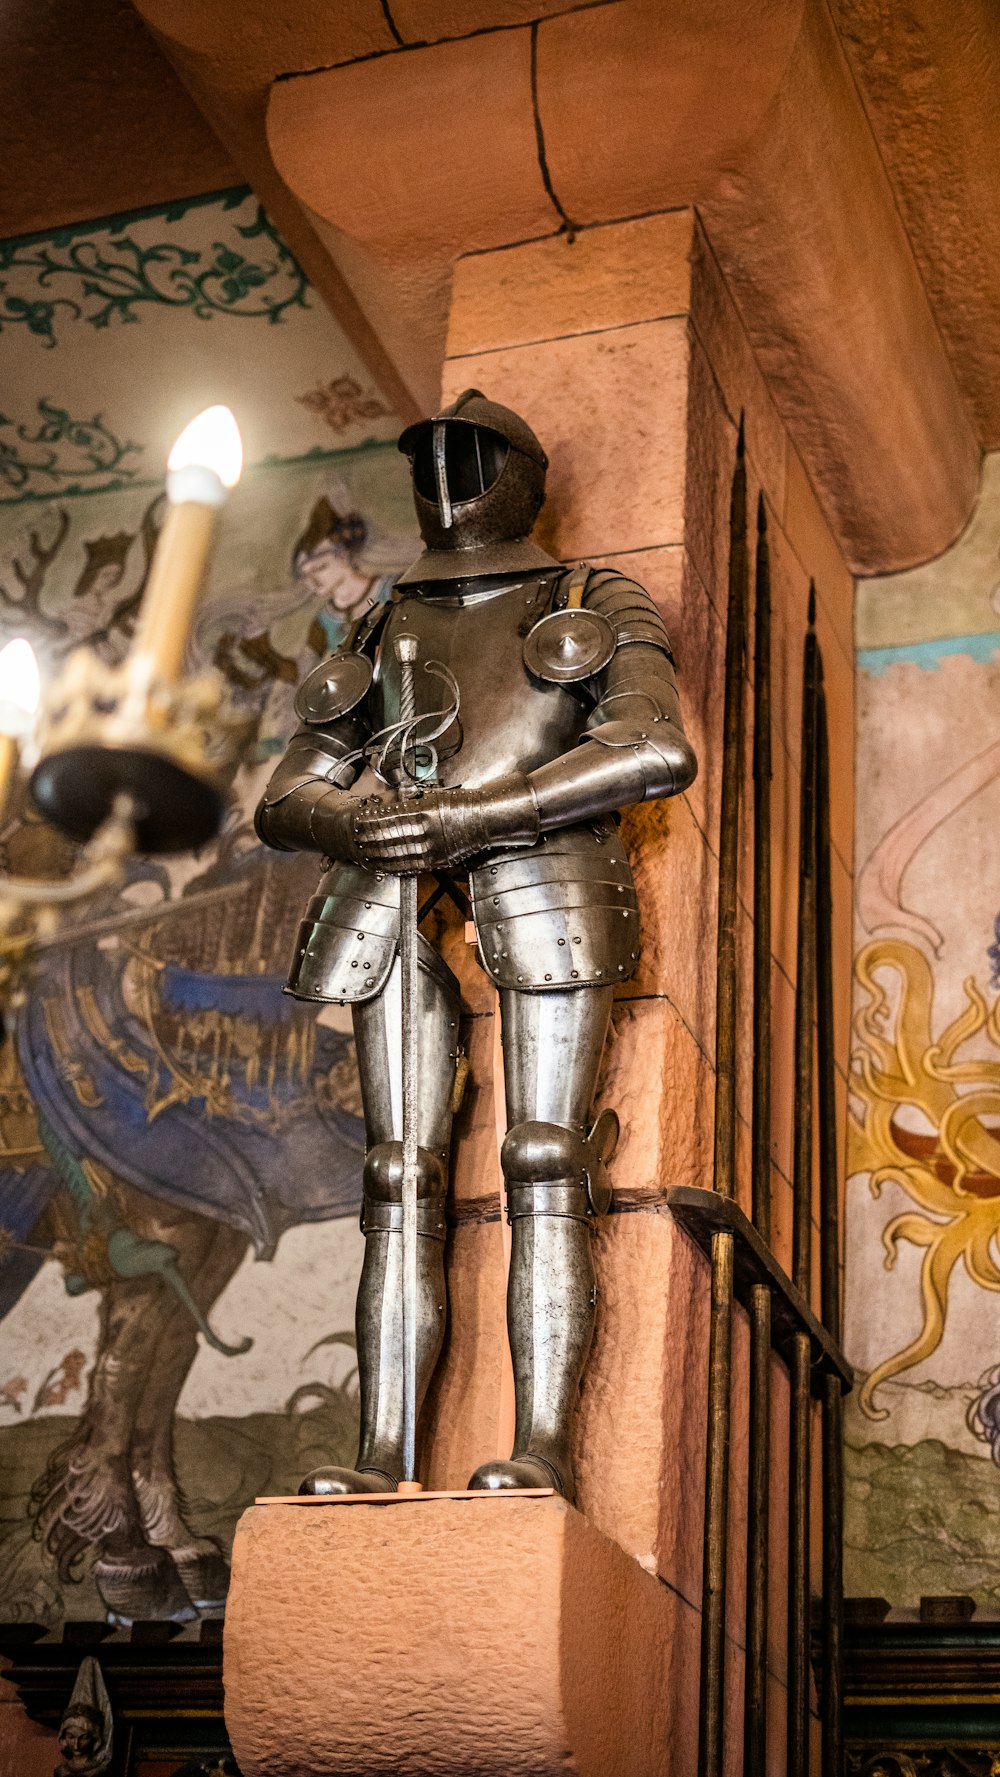 a statue of a man in a suit of armor